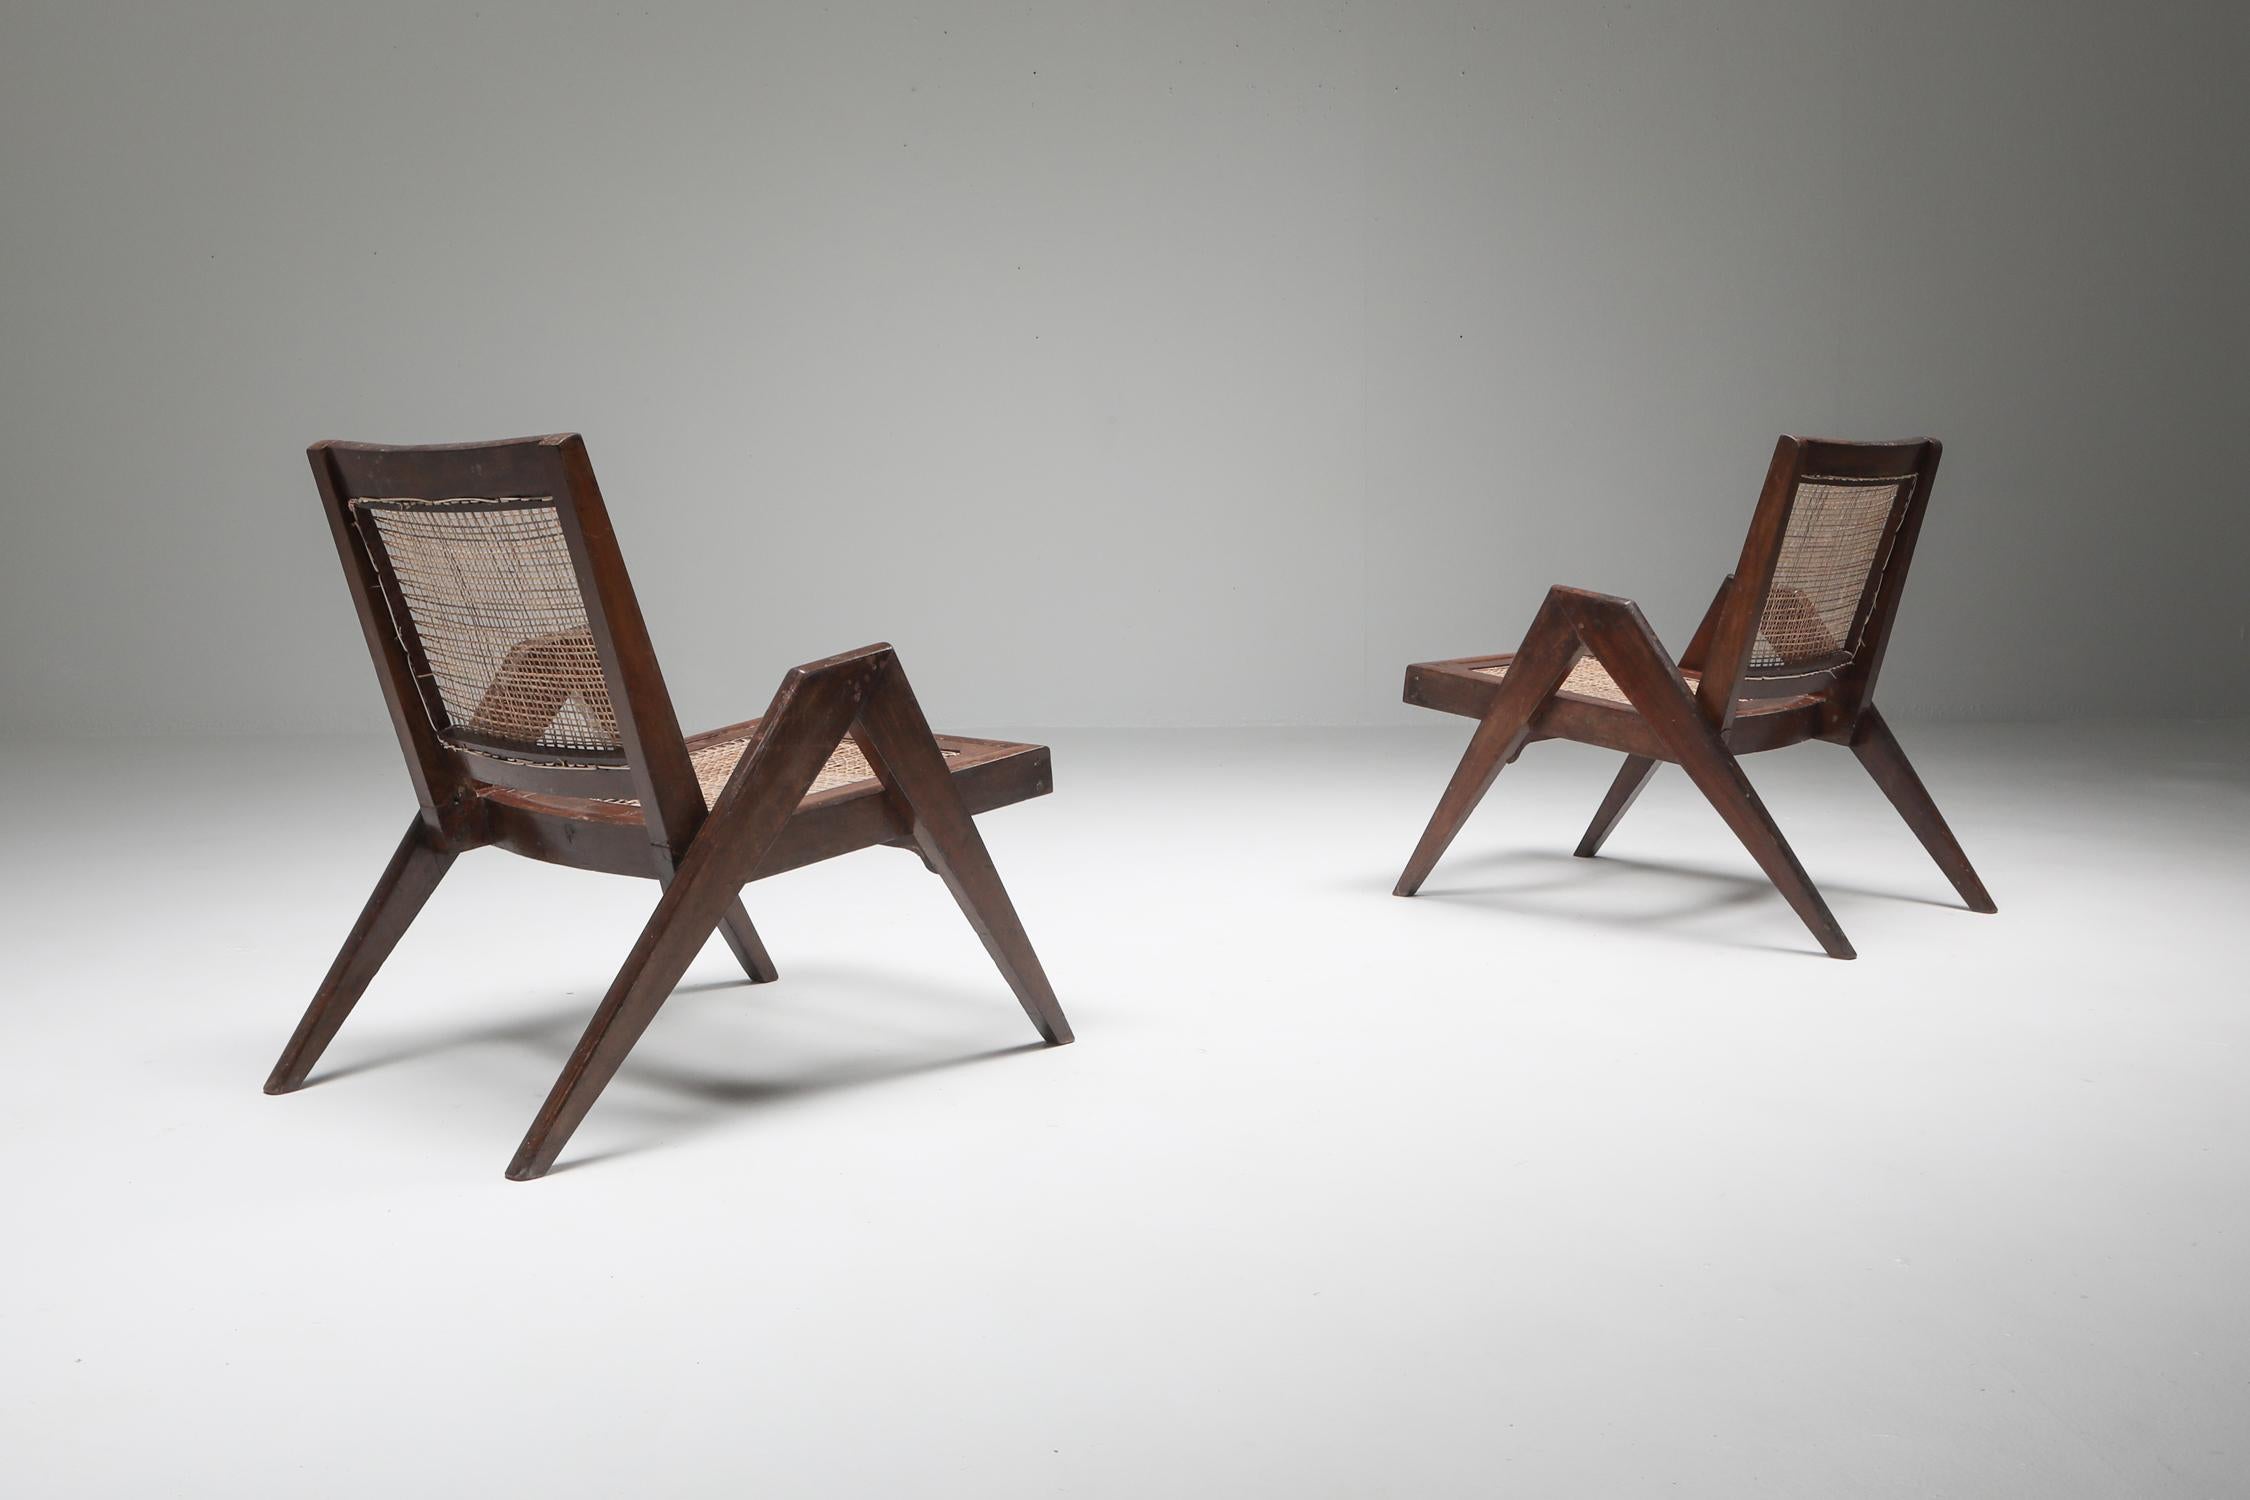 Indian Easy Chairs by Jeanneret, Chandigarh, 1955